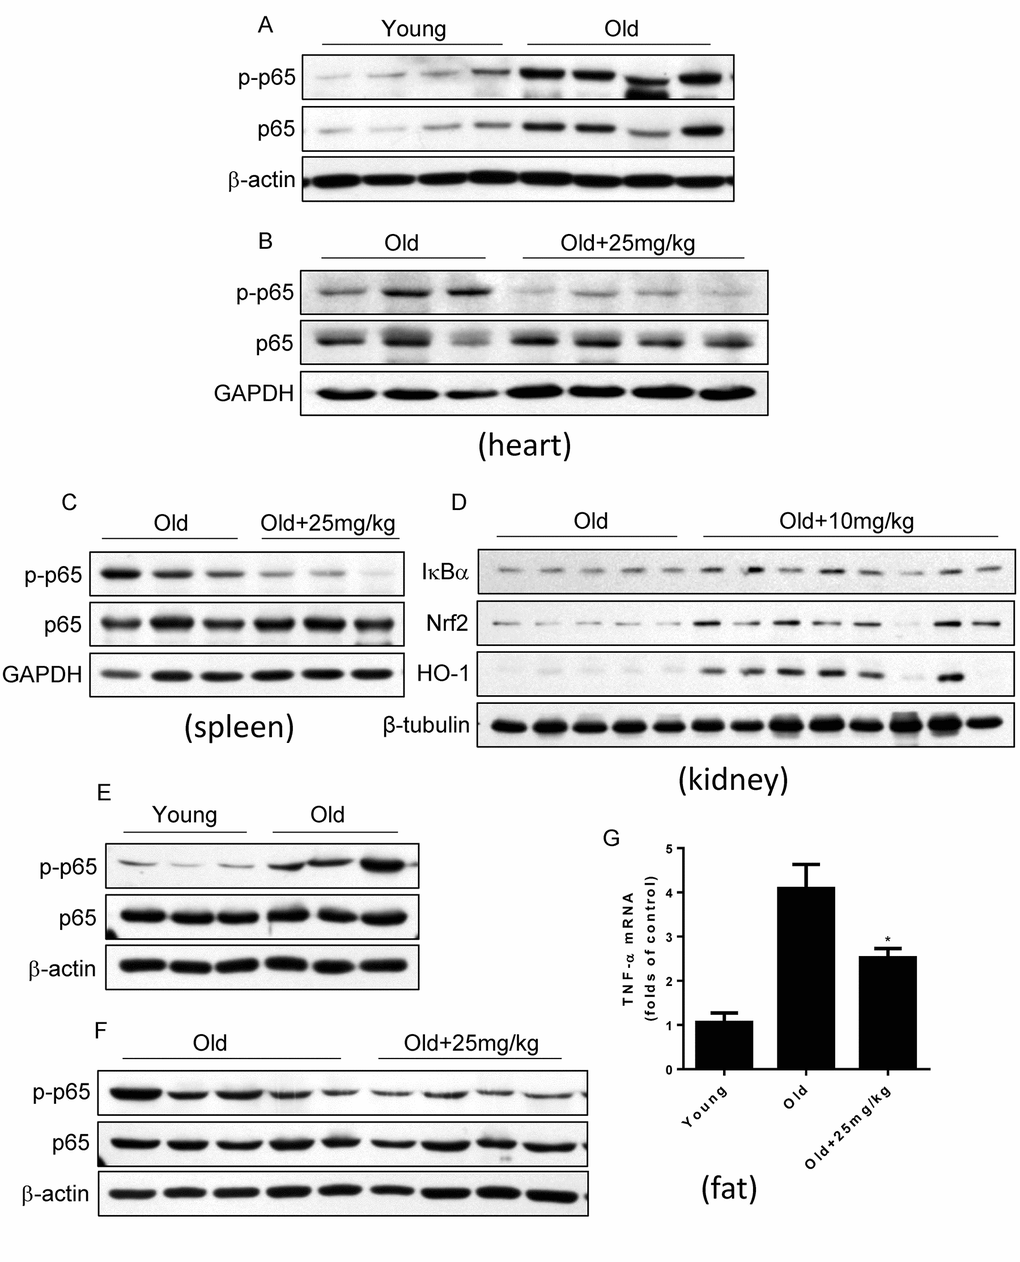 DMAMCL treatment suppresses NF-κB activities in multiple tissues and organs in old mice. The total protein was isolated from the heart, spleen, kidney, and fat tissues. The p-p65 and p65 protein expression levels in heart (A and B), and in spleen (C), the expression levels of IκBα, HO-1 and Nrf2 in kidney (D), and p-p65 and p65 protein expression levels in fat (E and F), were examined by Western blot (n=3-8). (G) TNF-α mRNA levels in fat tissue were detected by qRT-PCR. Data are represented as the mean ± SEM. *P 